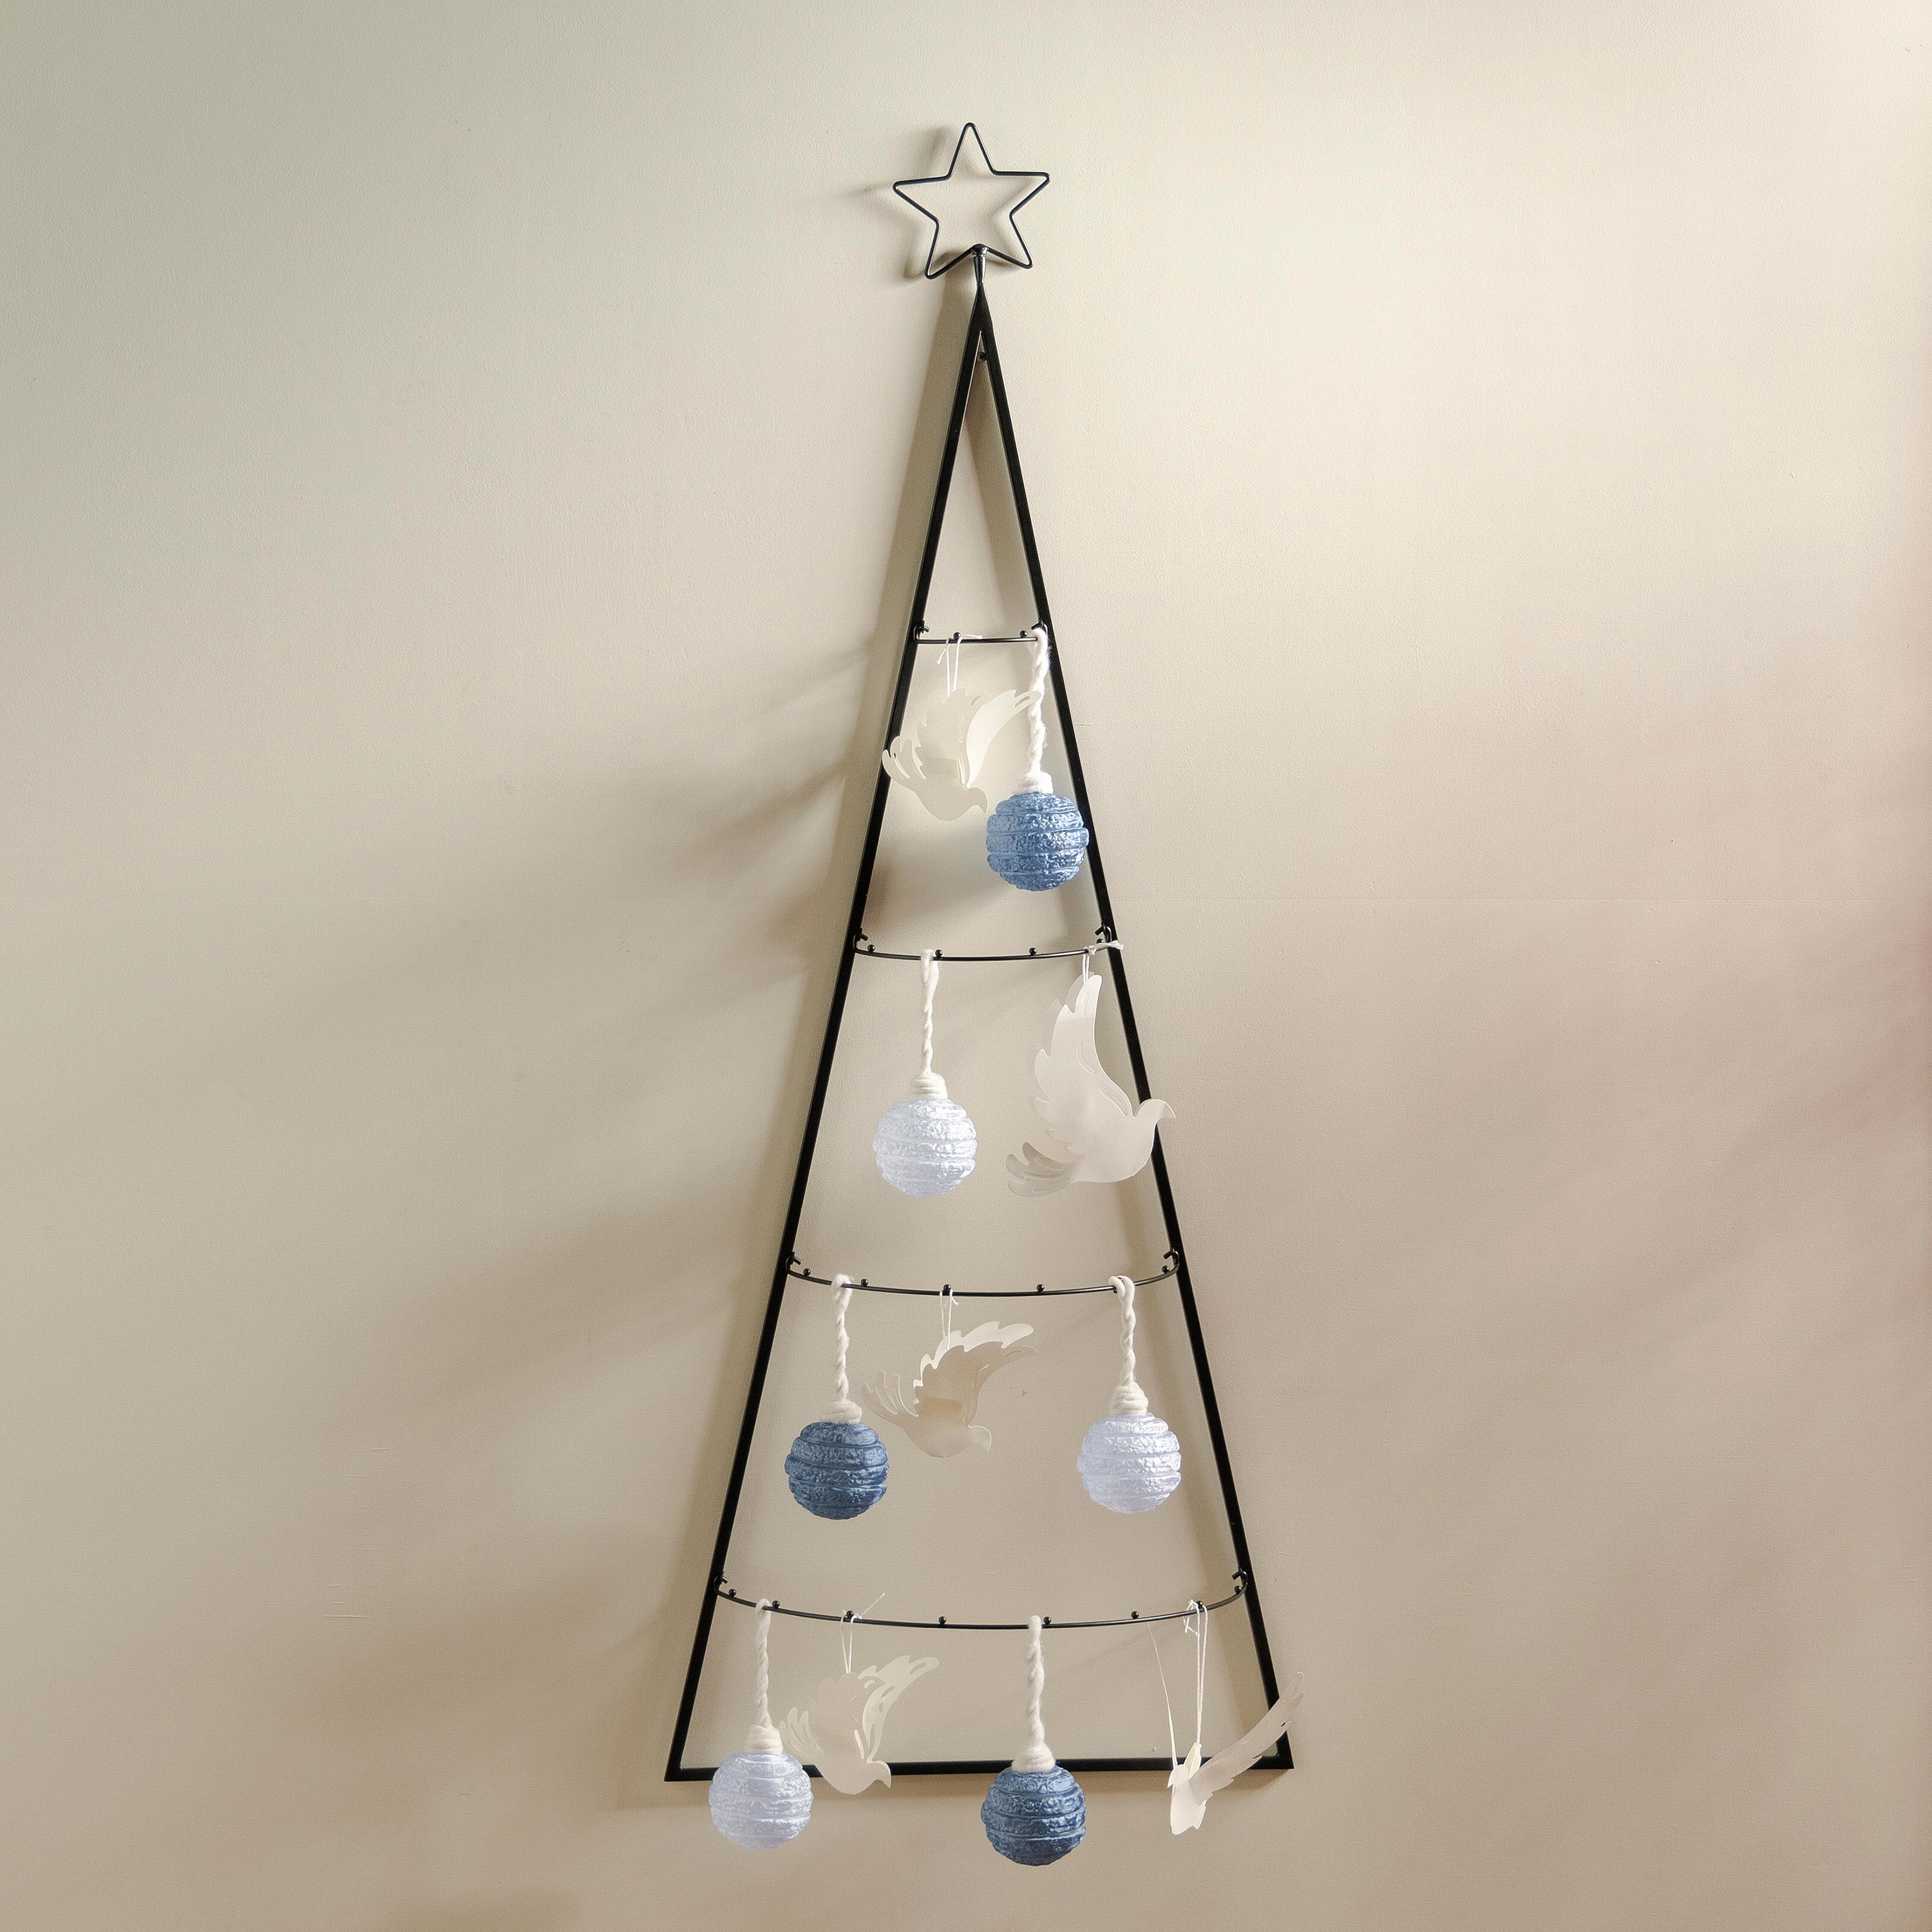 Metal Wall-Mounted Tree-Shaped Ornament Holder